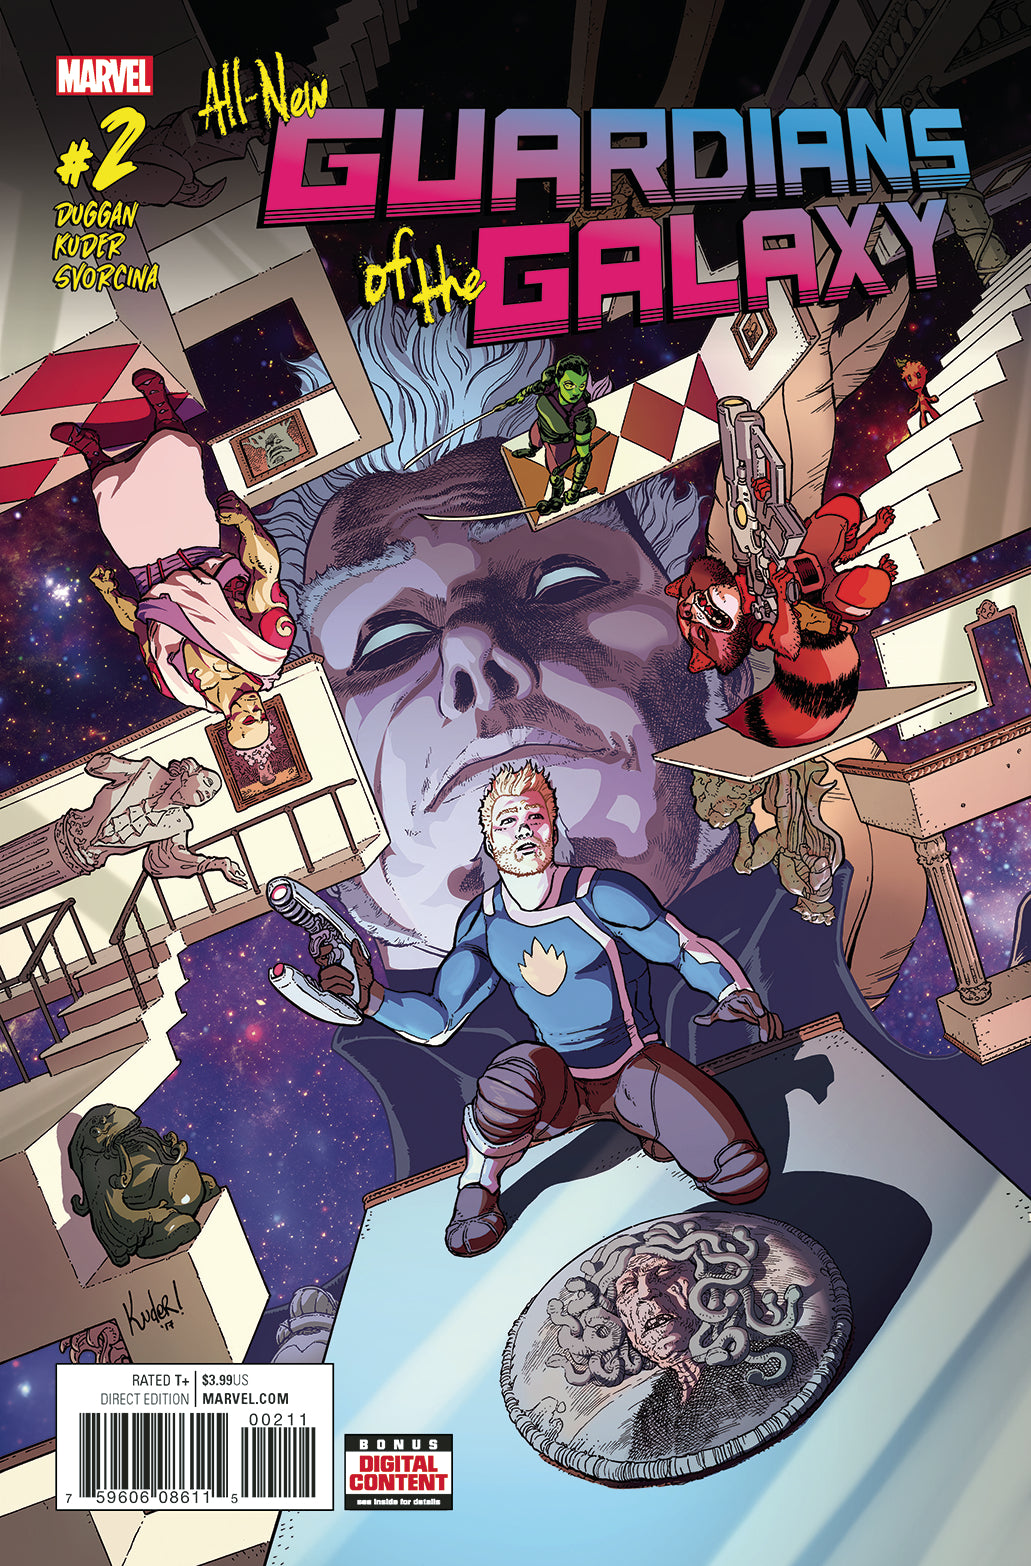 ALL NEW GUARDIANS OF GALAXY #2 | Game Master's Emporium (The New GME)